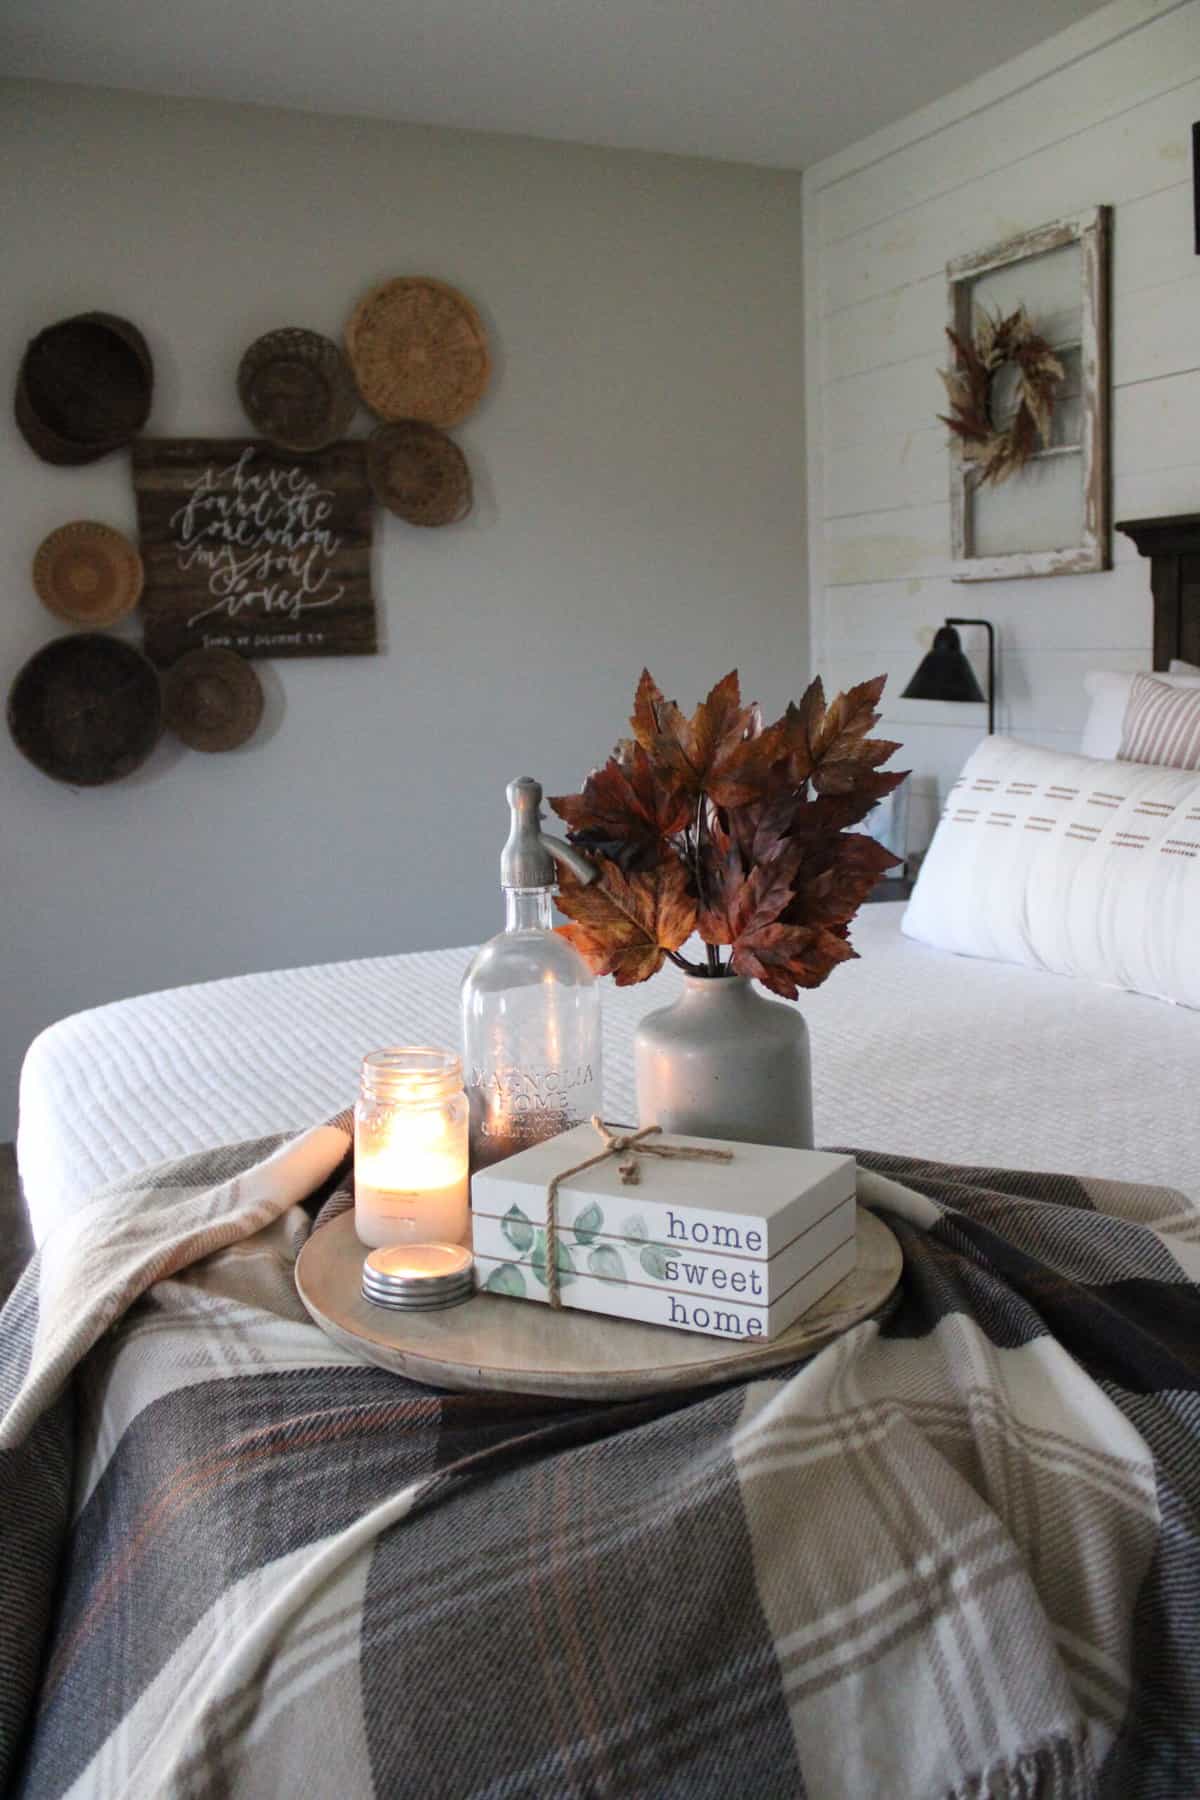 Bedroom Tray With Candle